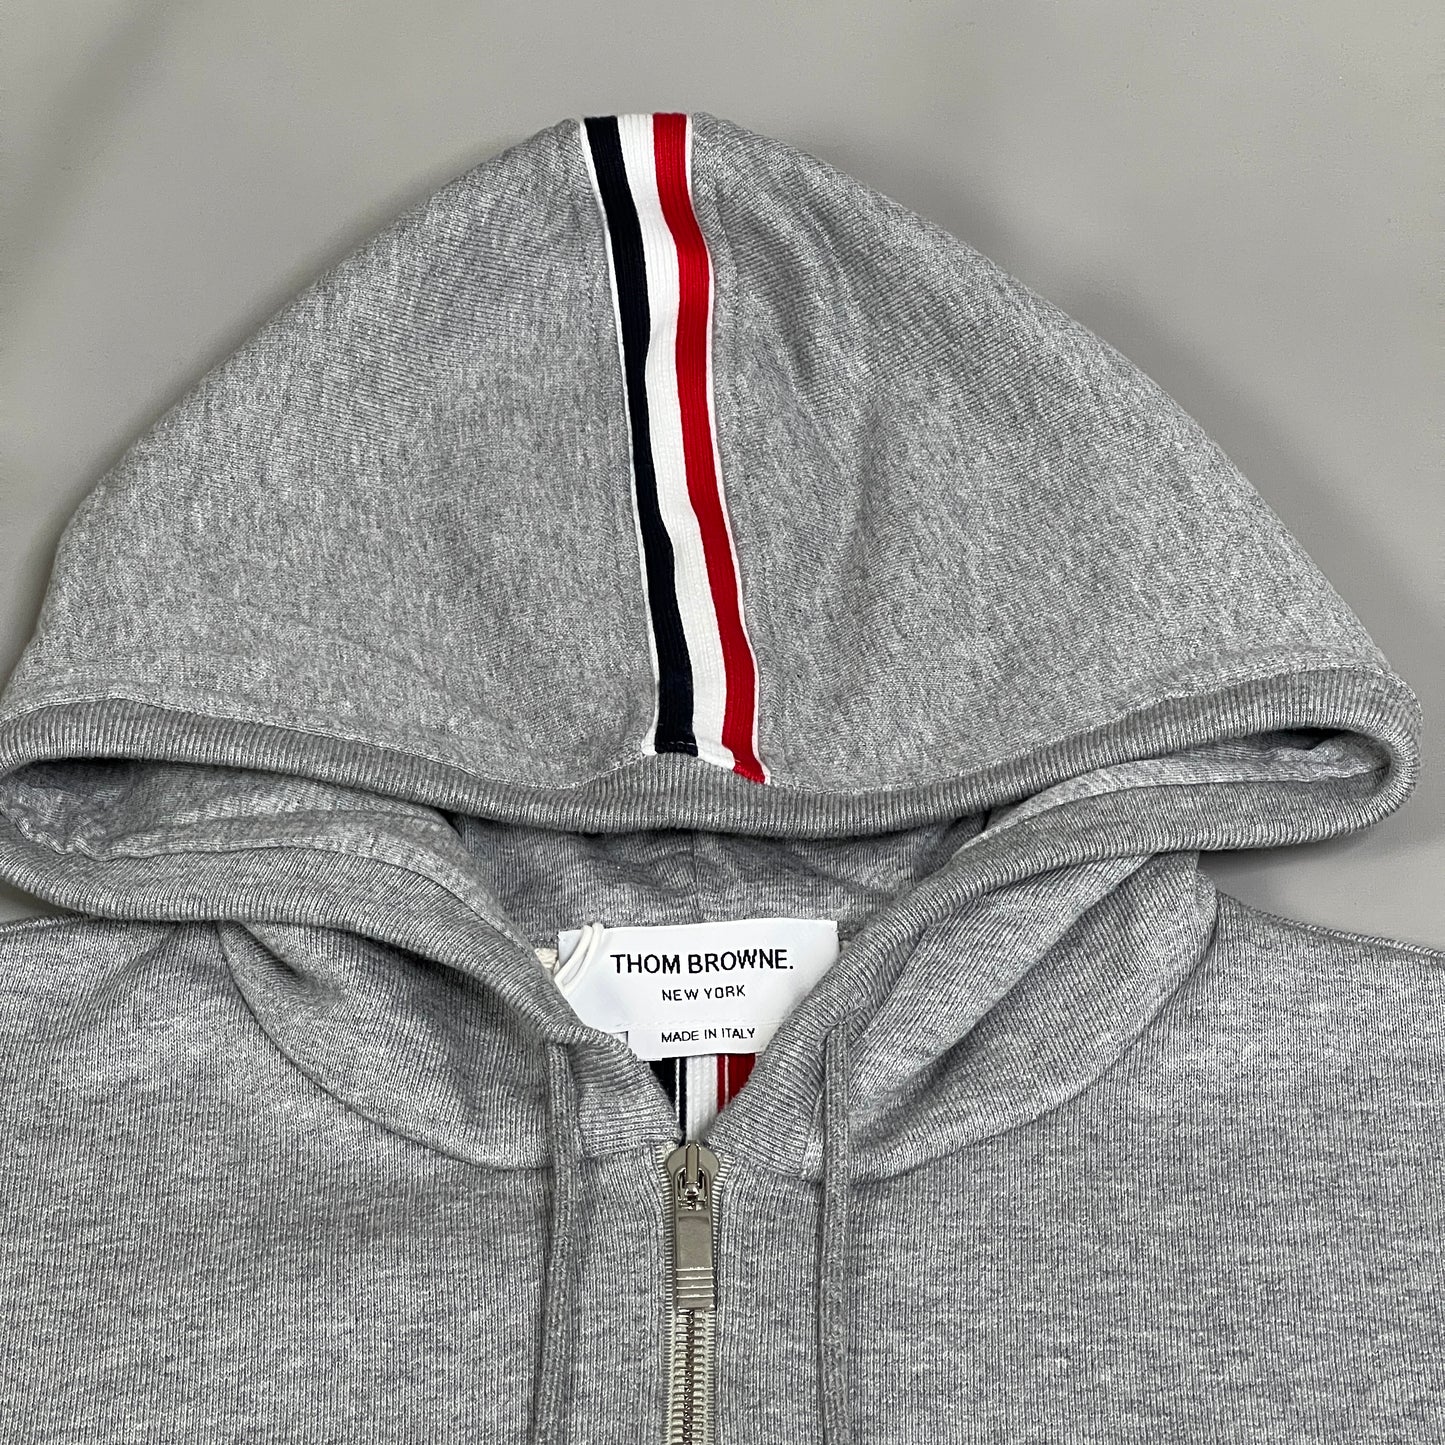 THOM BROWNE Hoodie Zip Up Pullover in Classic Loop Back w/Center Back RWB Stripe Lt Grey Size 1 (New)